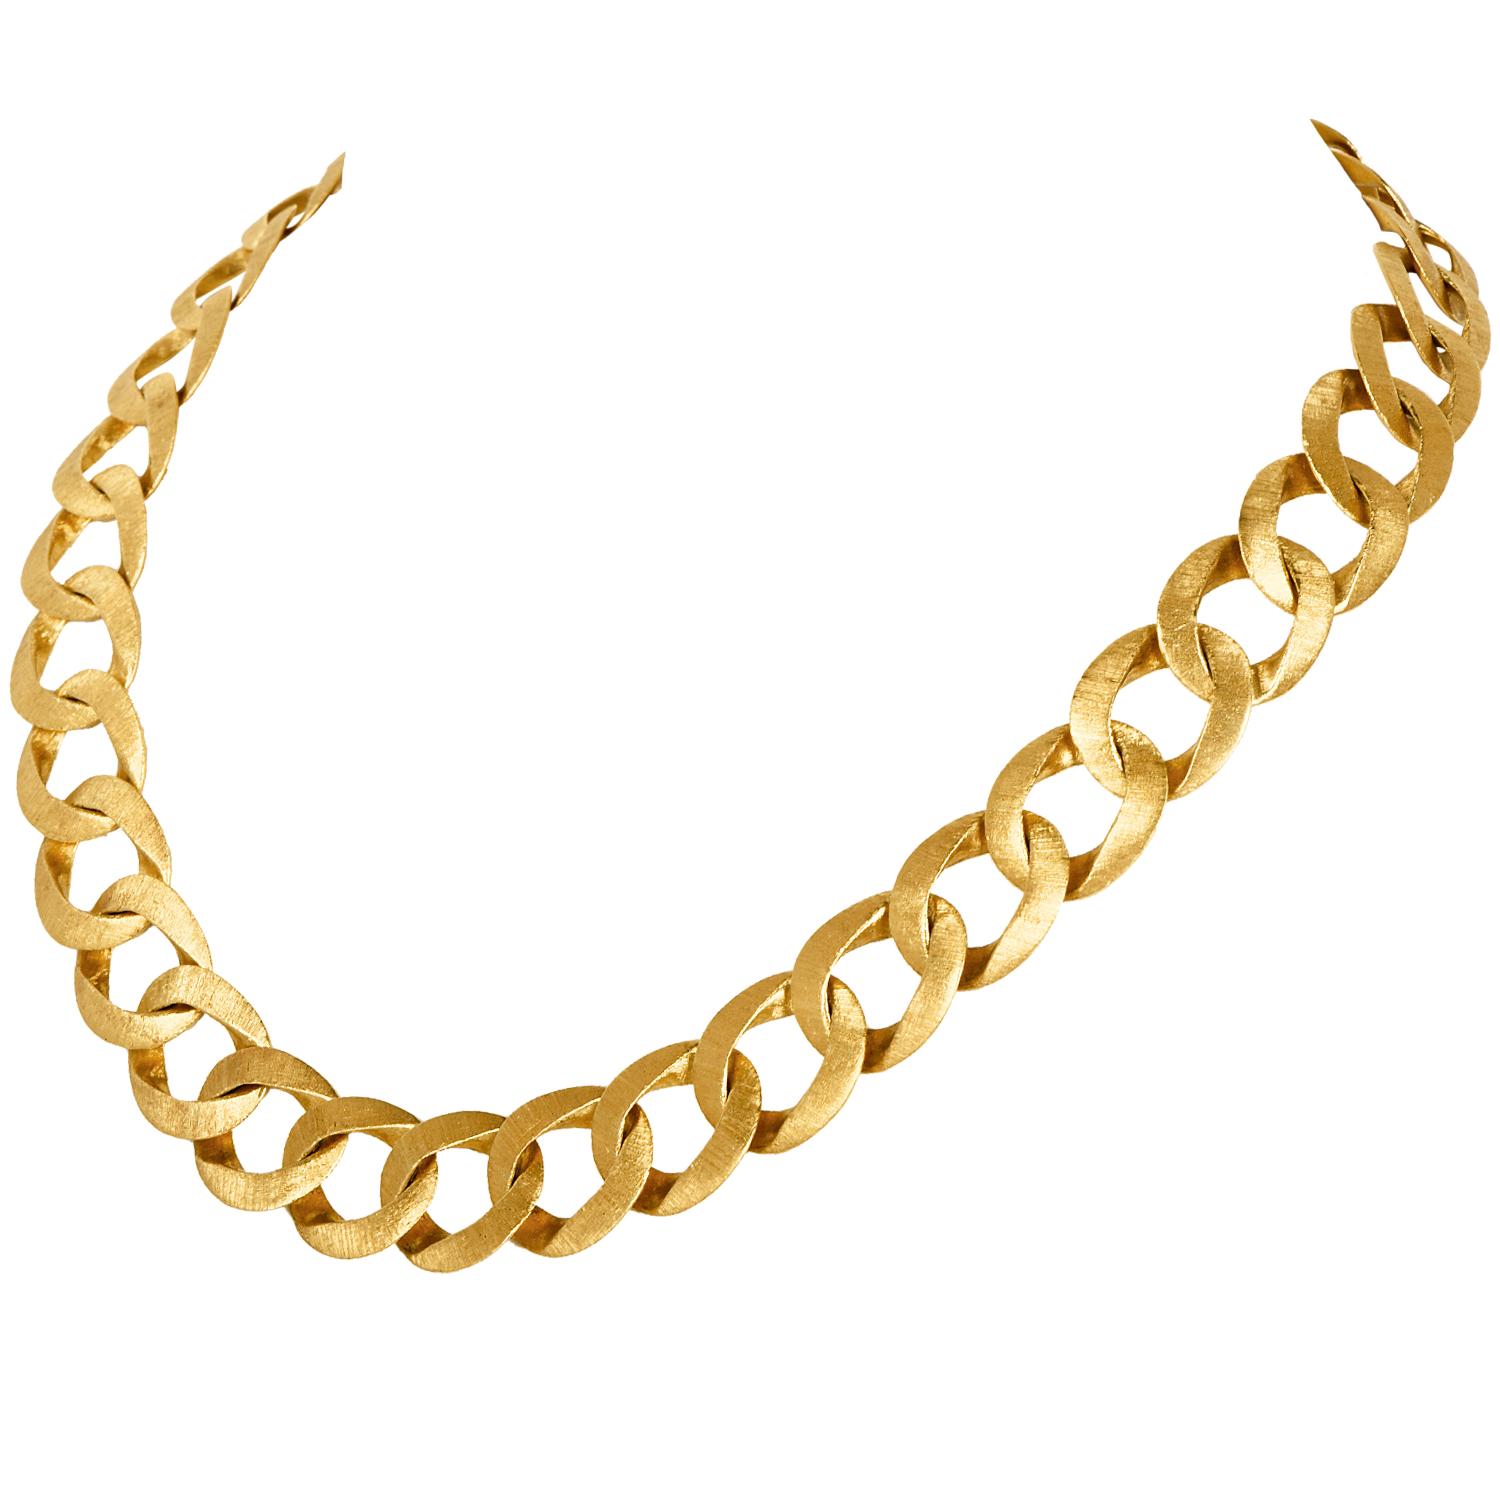 Buccellati continues to be most desired for its sophistication and elegance and has become a truly iconic jewelry maker. This very elegant Vintage piece is made By its founder Mario Buccellati in 18k yellow gold with beautiful rigatoni finish. He